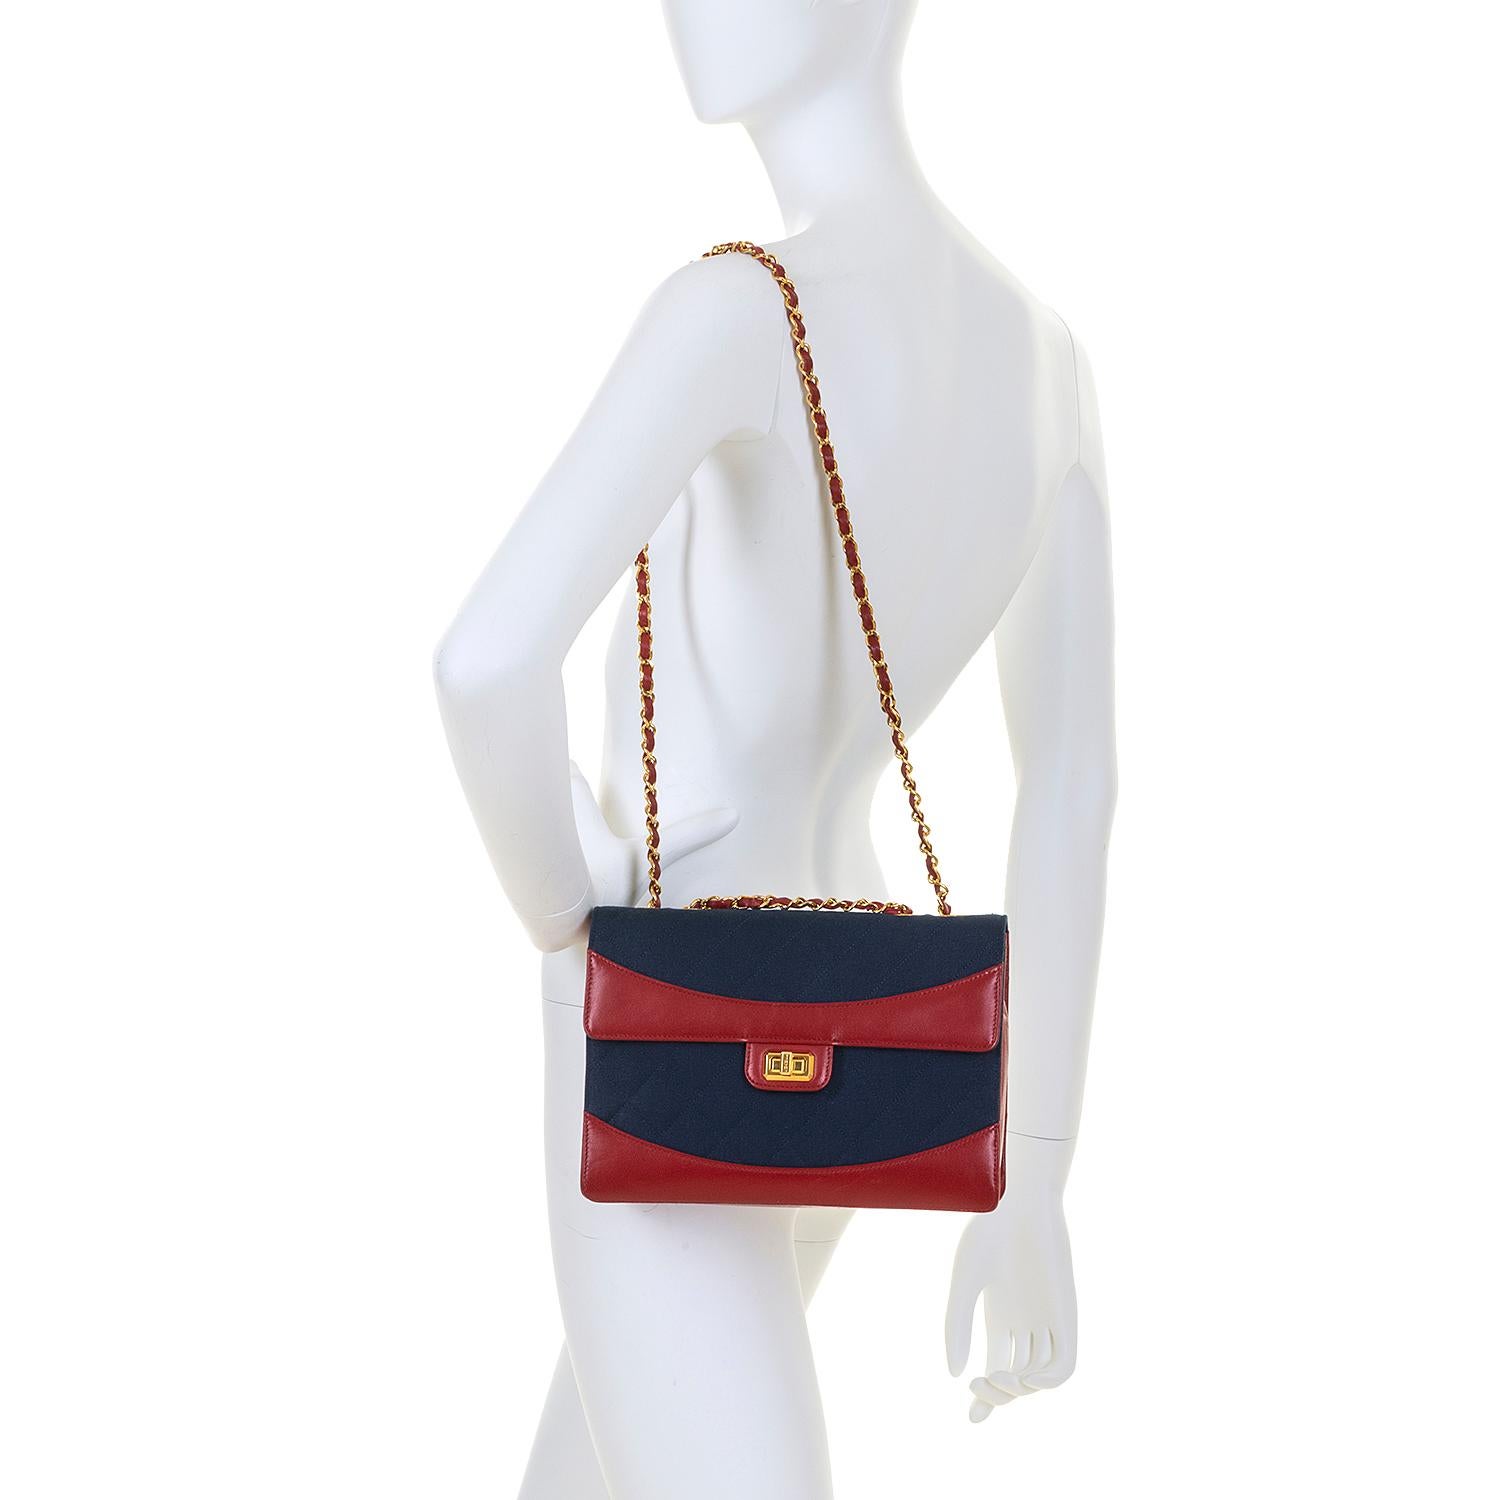 WOW Chanel Vintage Navy Quilted Jersey/Red lambskin 23cm bag by Karl Lagerfeld For Sale 1